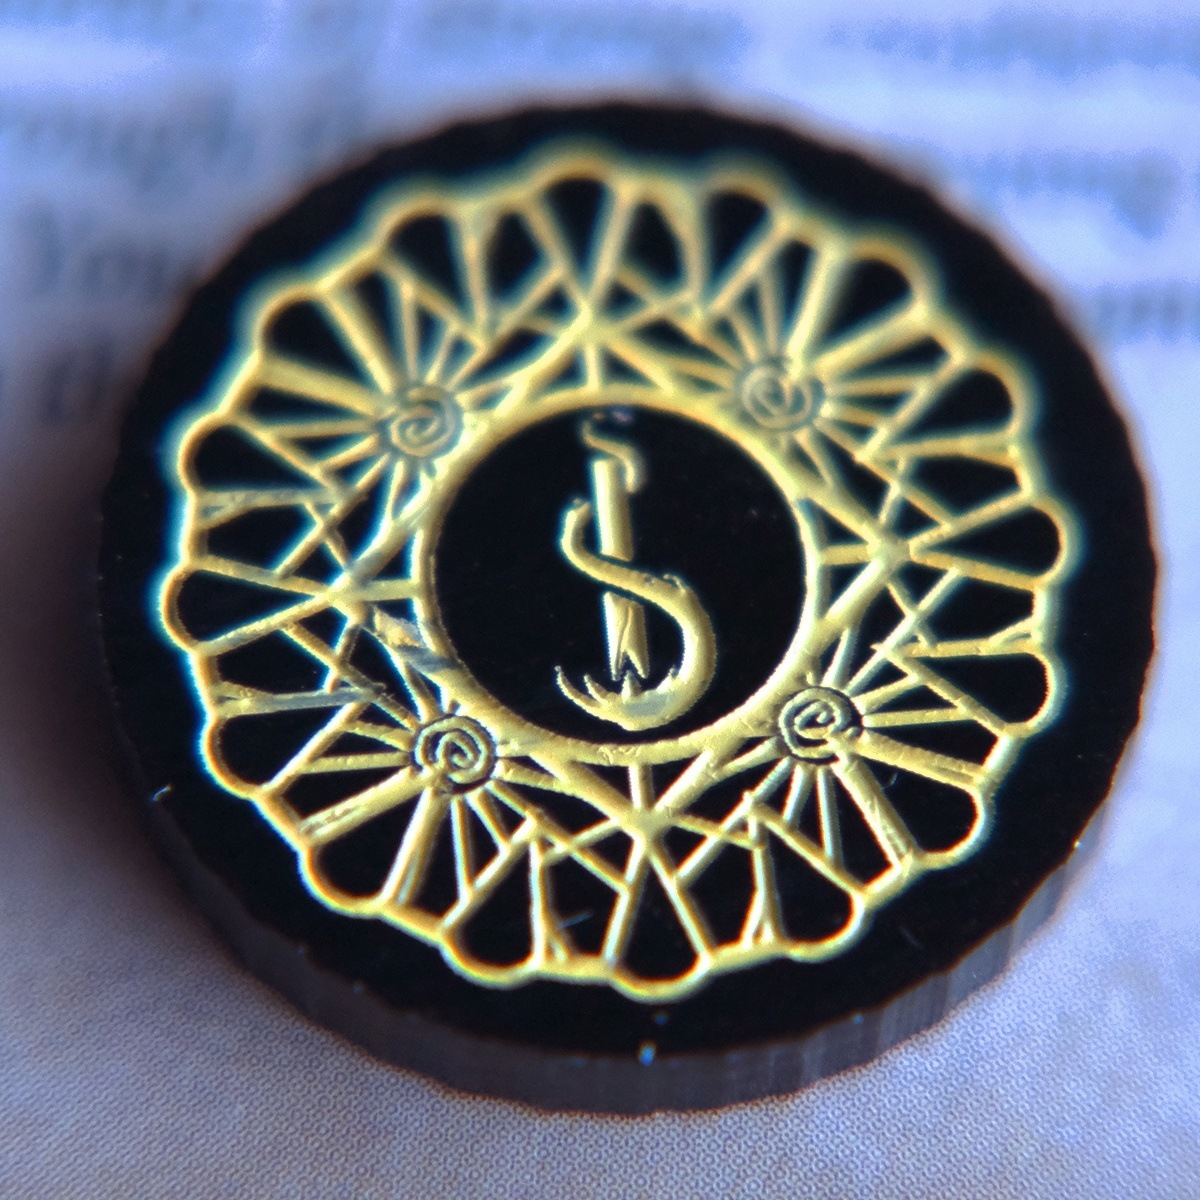 Close up of the one-value side of the Carcosa Limited Edition Doom Token highlighting the inverted torch motif